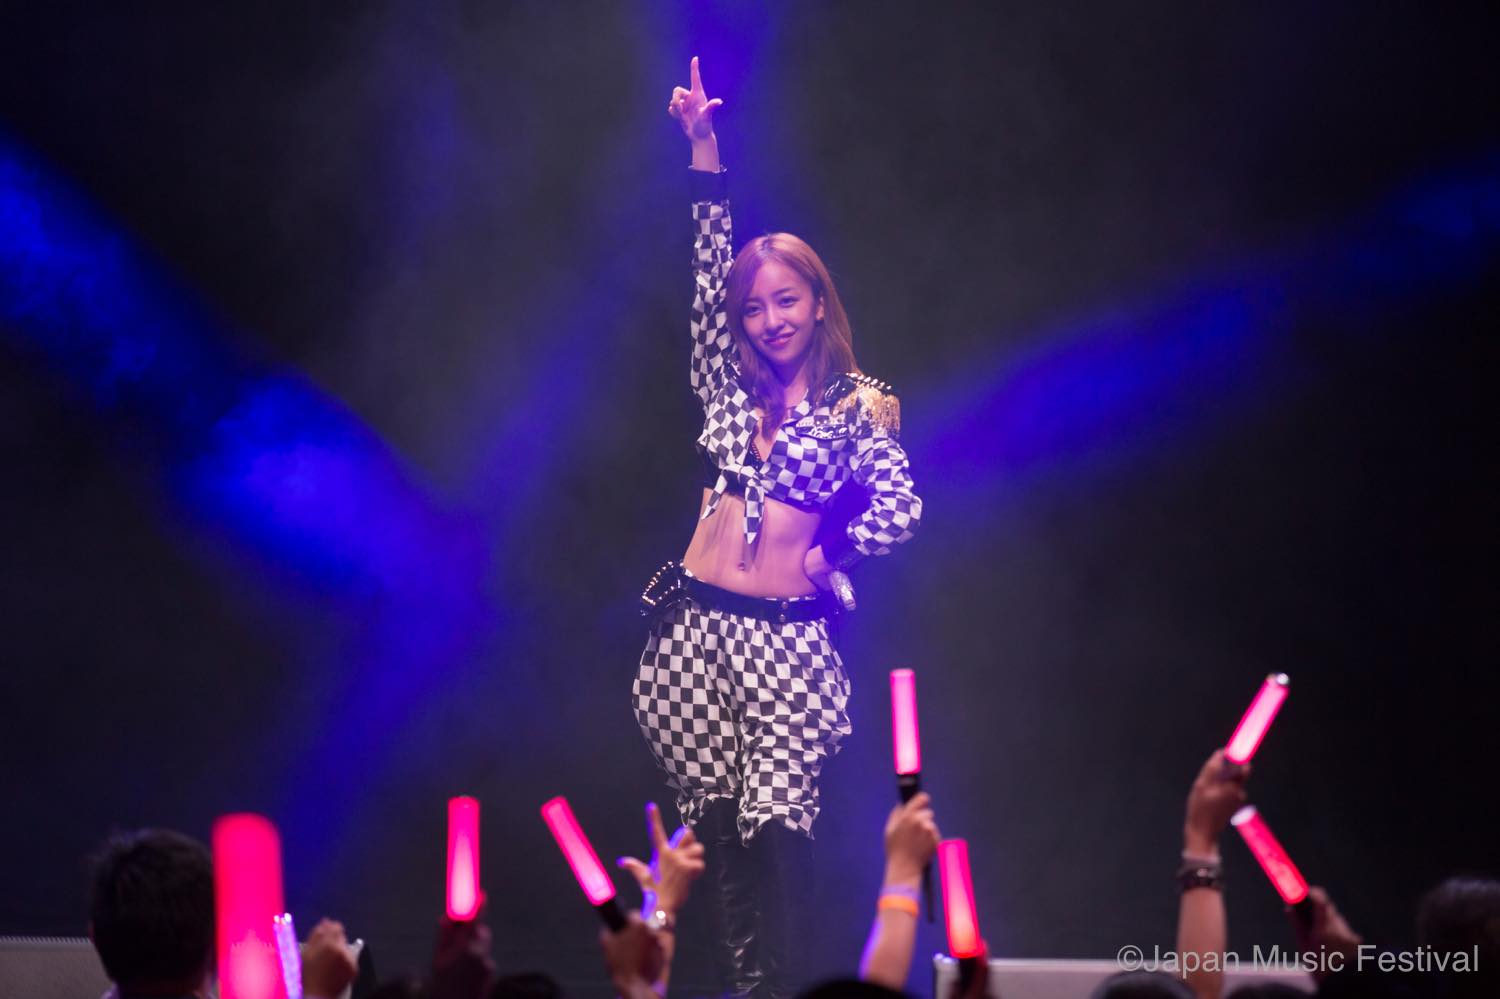 Tomomi Itano Lights Up Japan Music Festival With 1st Performance in Singapore!